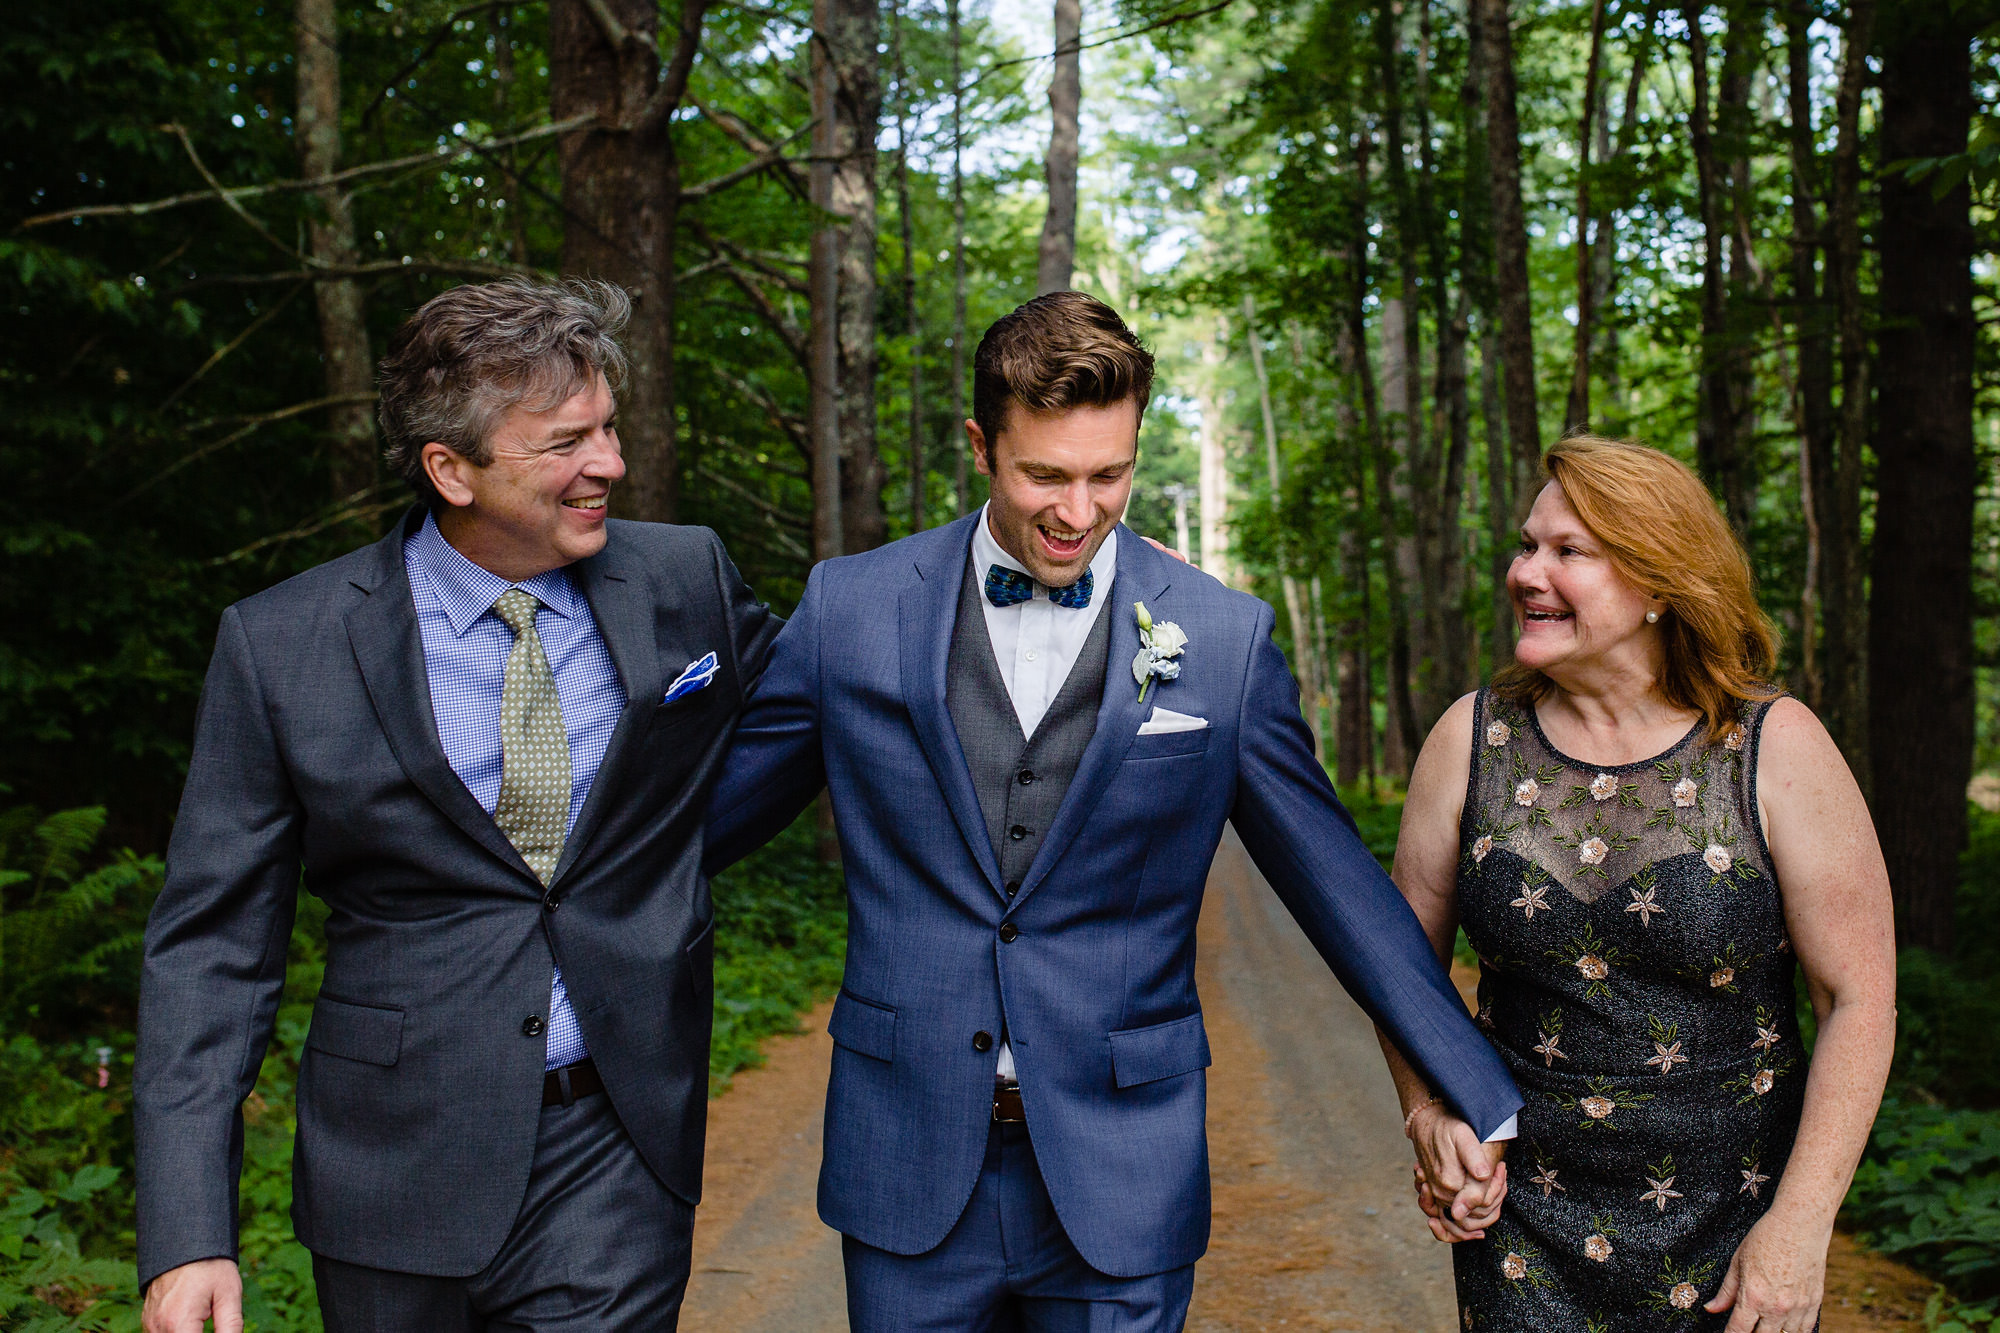 A groom holds his parents' hands at his wedding.